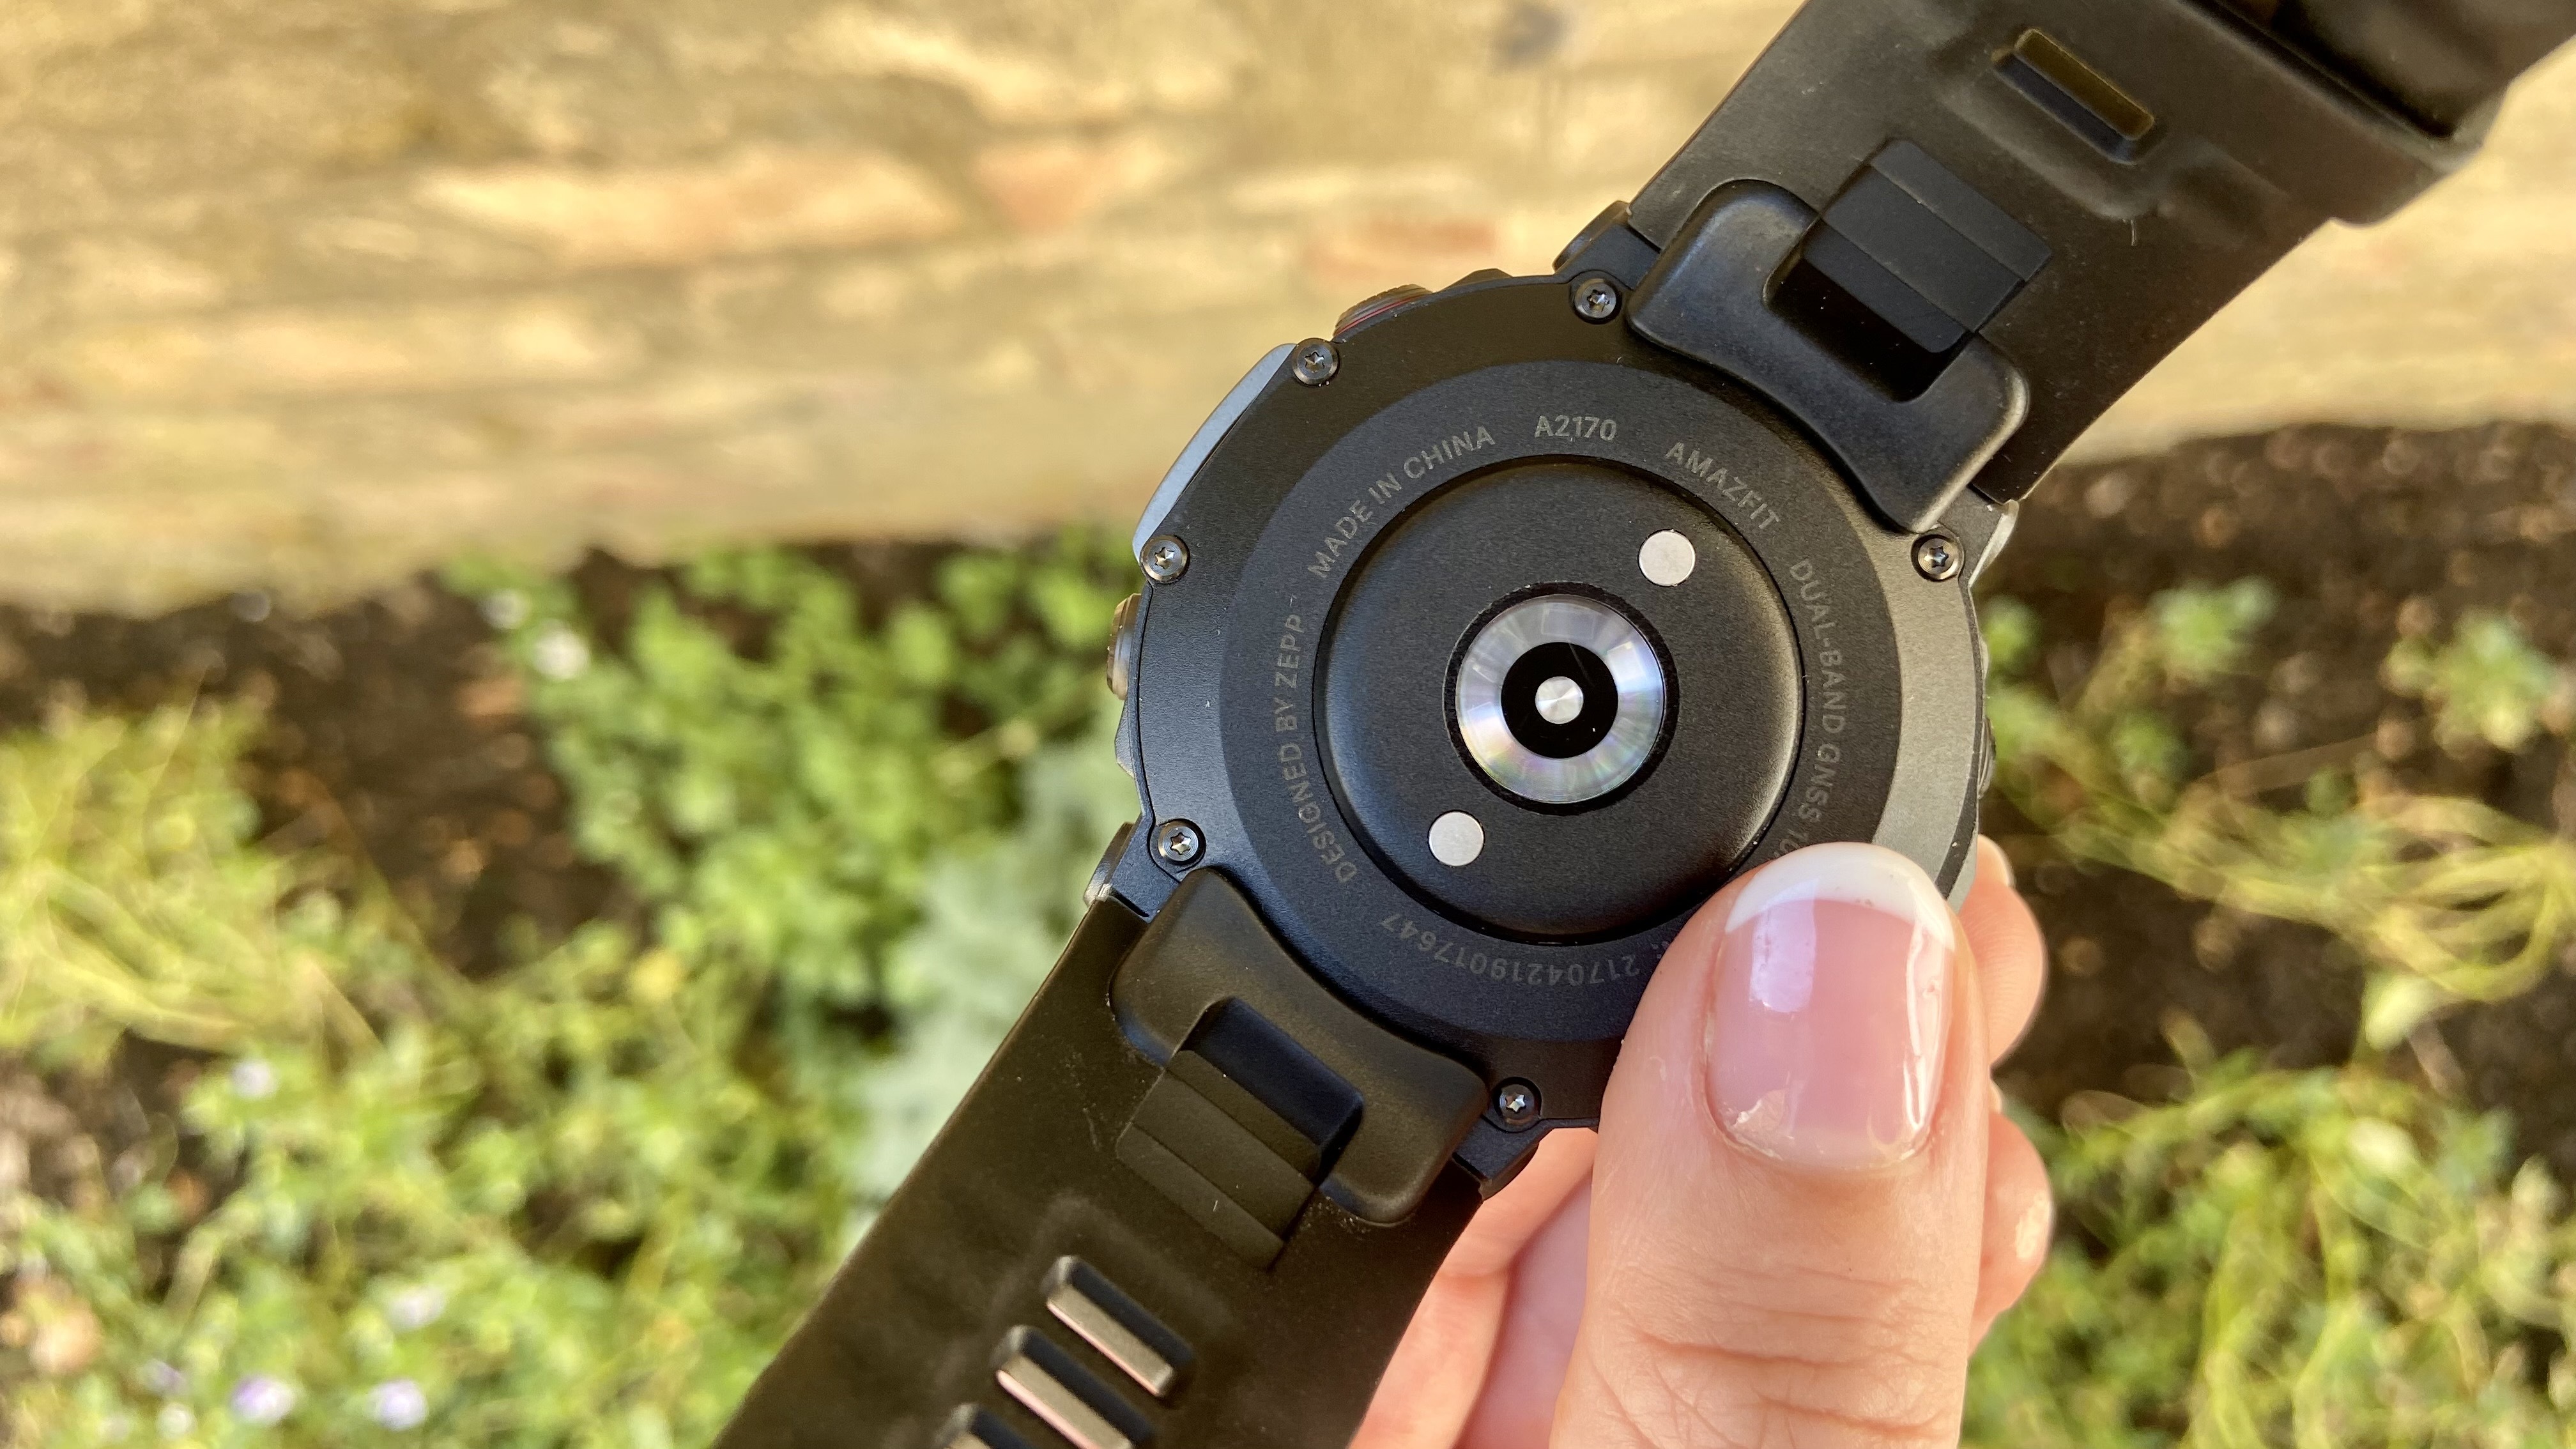 Image of the heart rate monitor on the Amazfit T REX 2